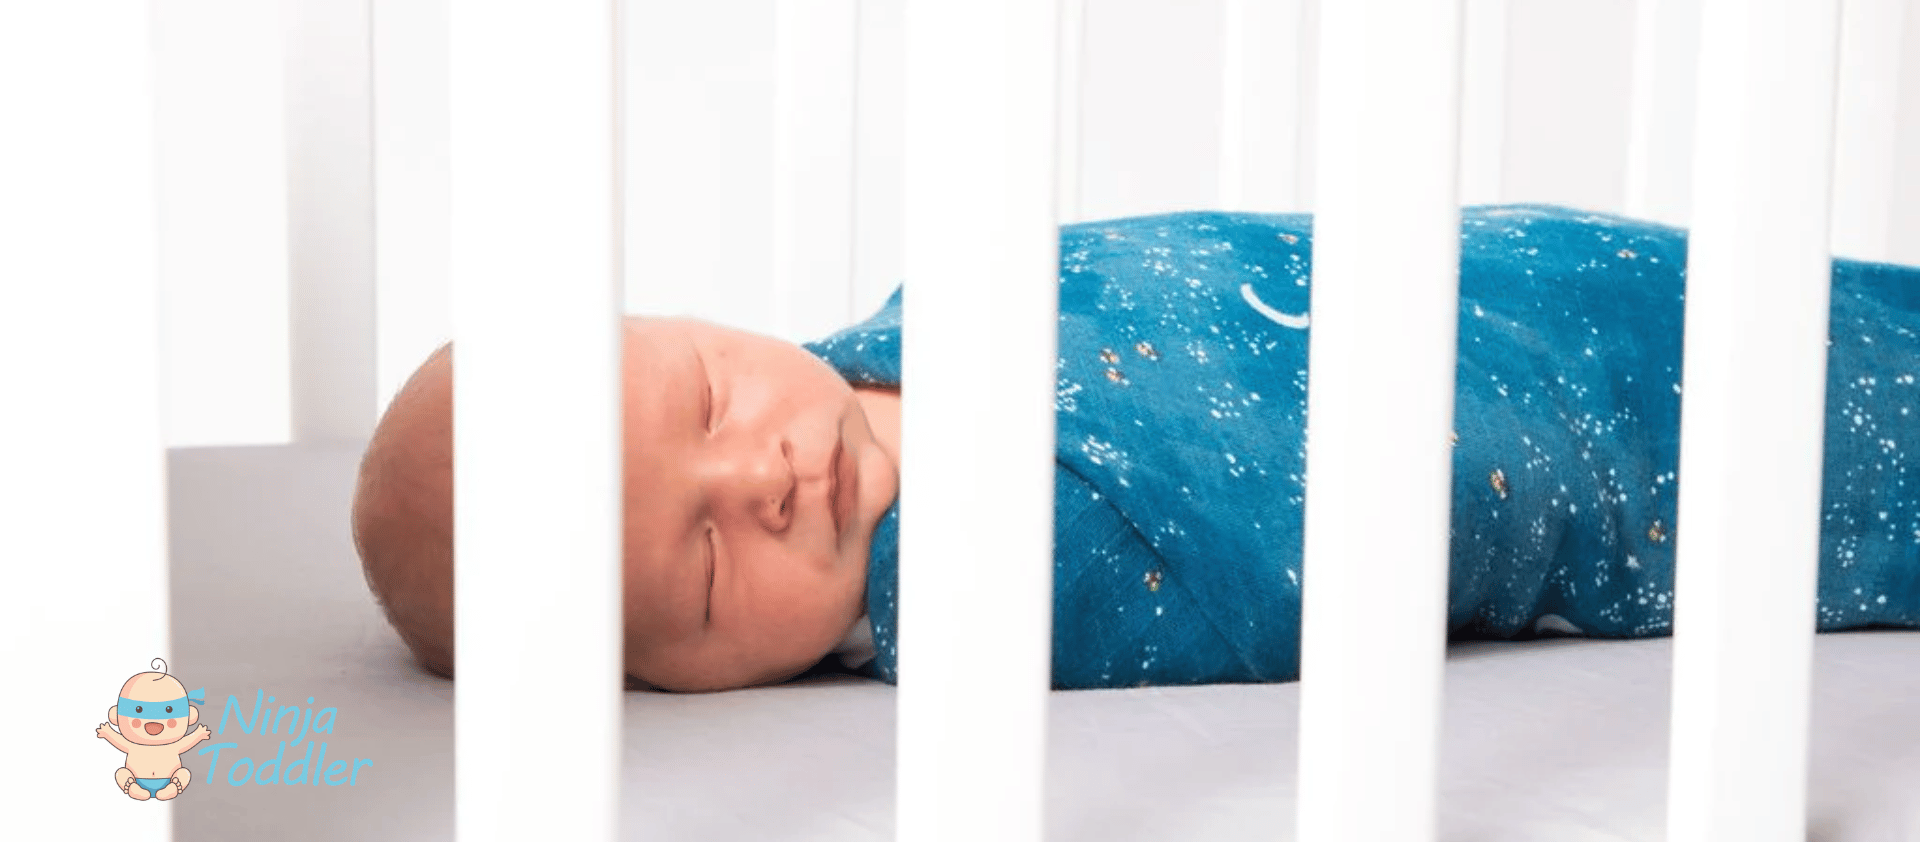 Baby Nursery Temperature: What's the Ideal Range for a Comfortable Sleep?